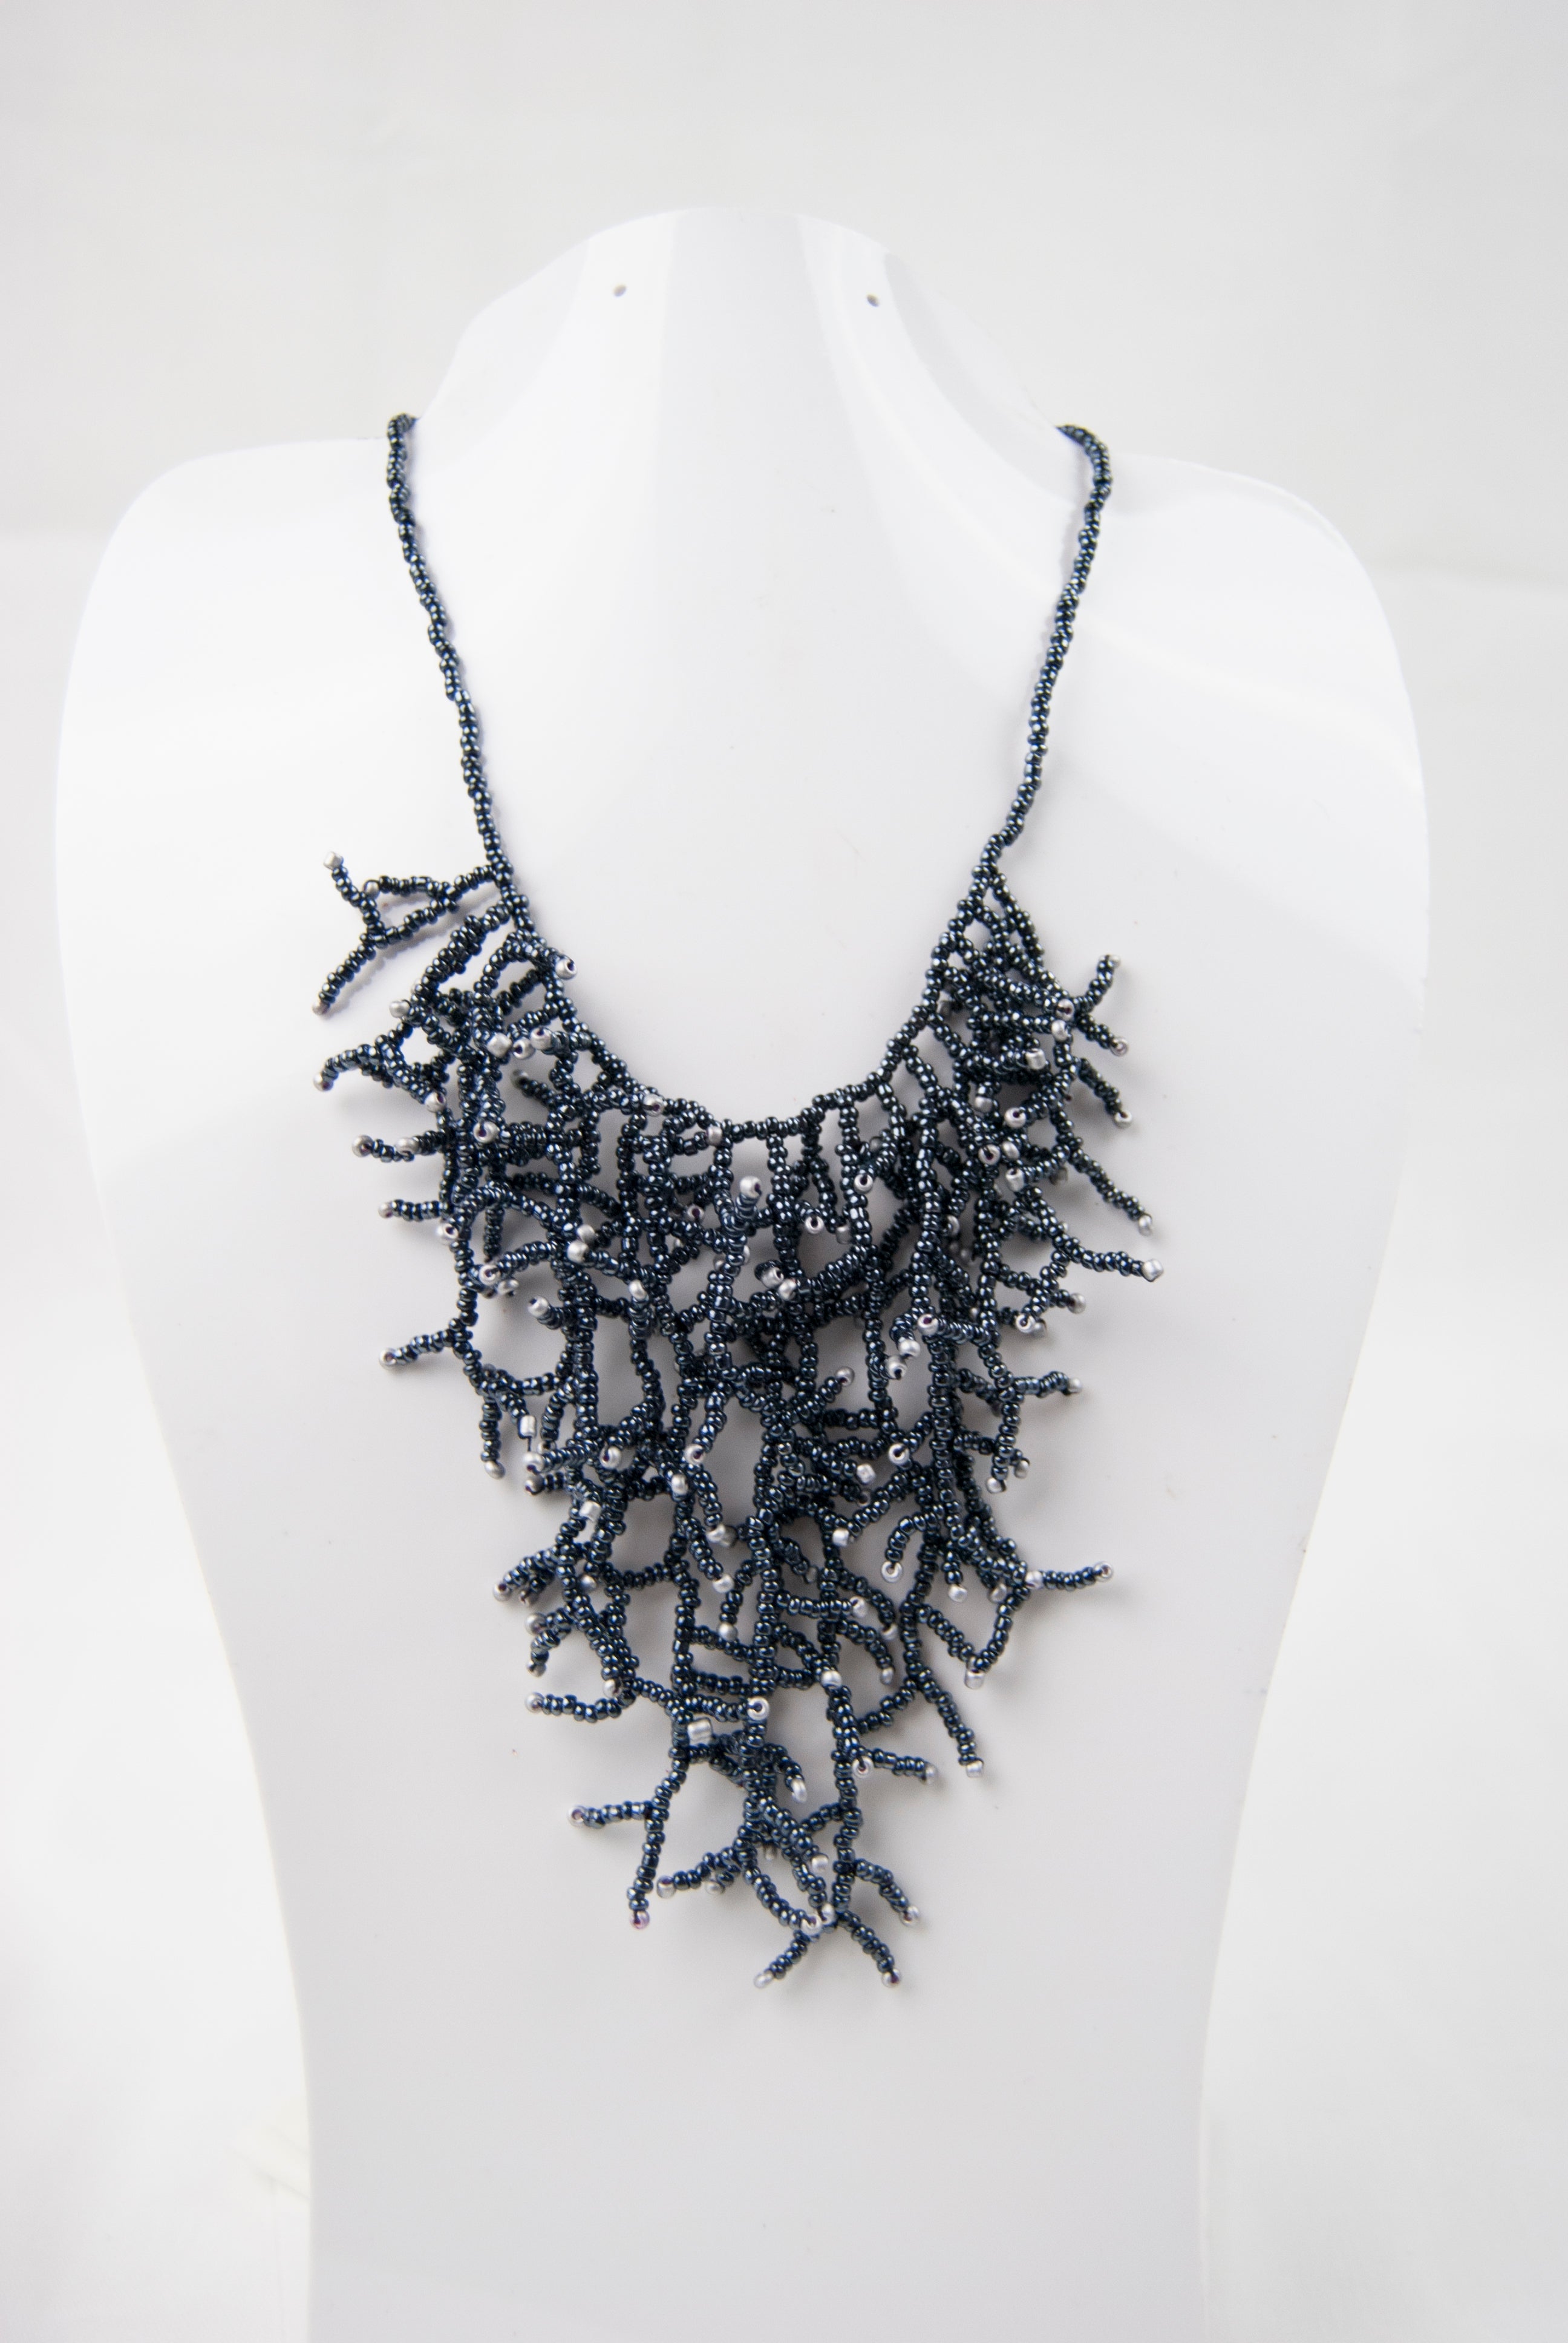 Beaded Coral Necklaces - Gunmetal (3 Styles)